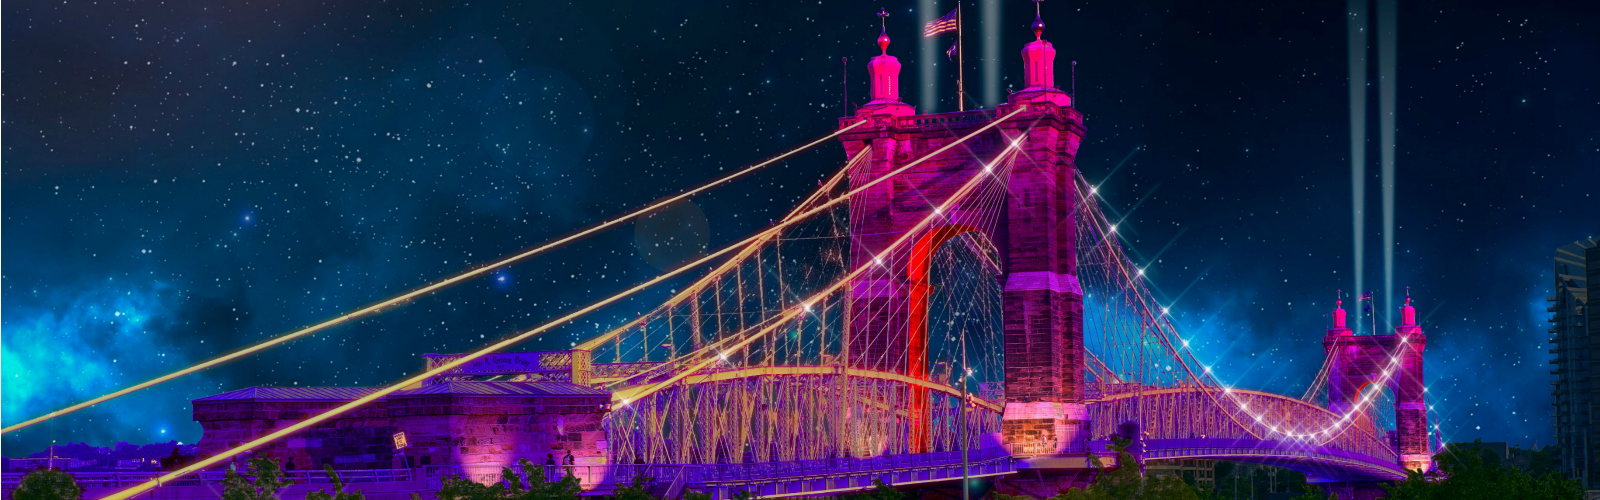 The Suspension Bridge will be lit up by an Erlanger-based company and set to music for Blink 2019.